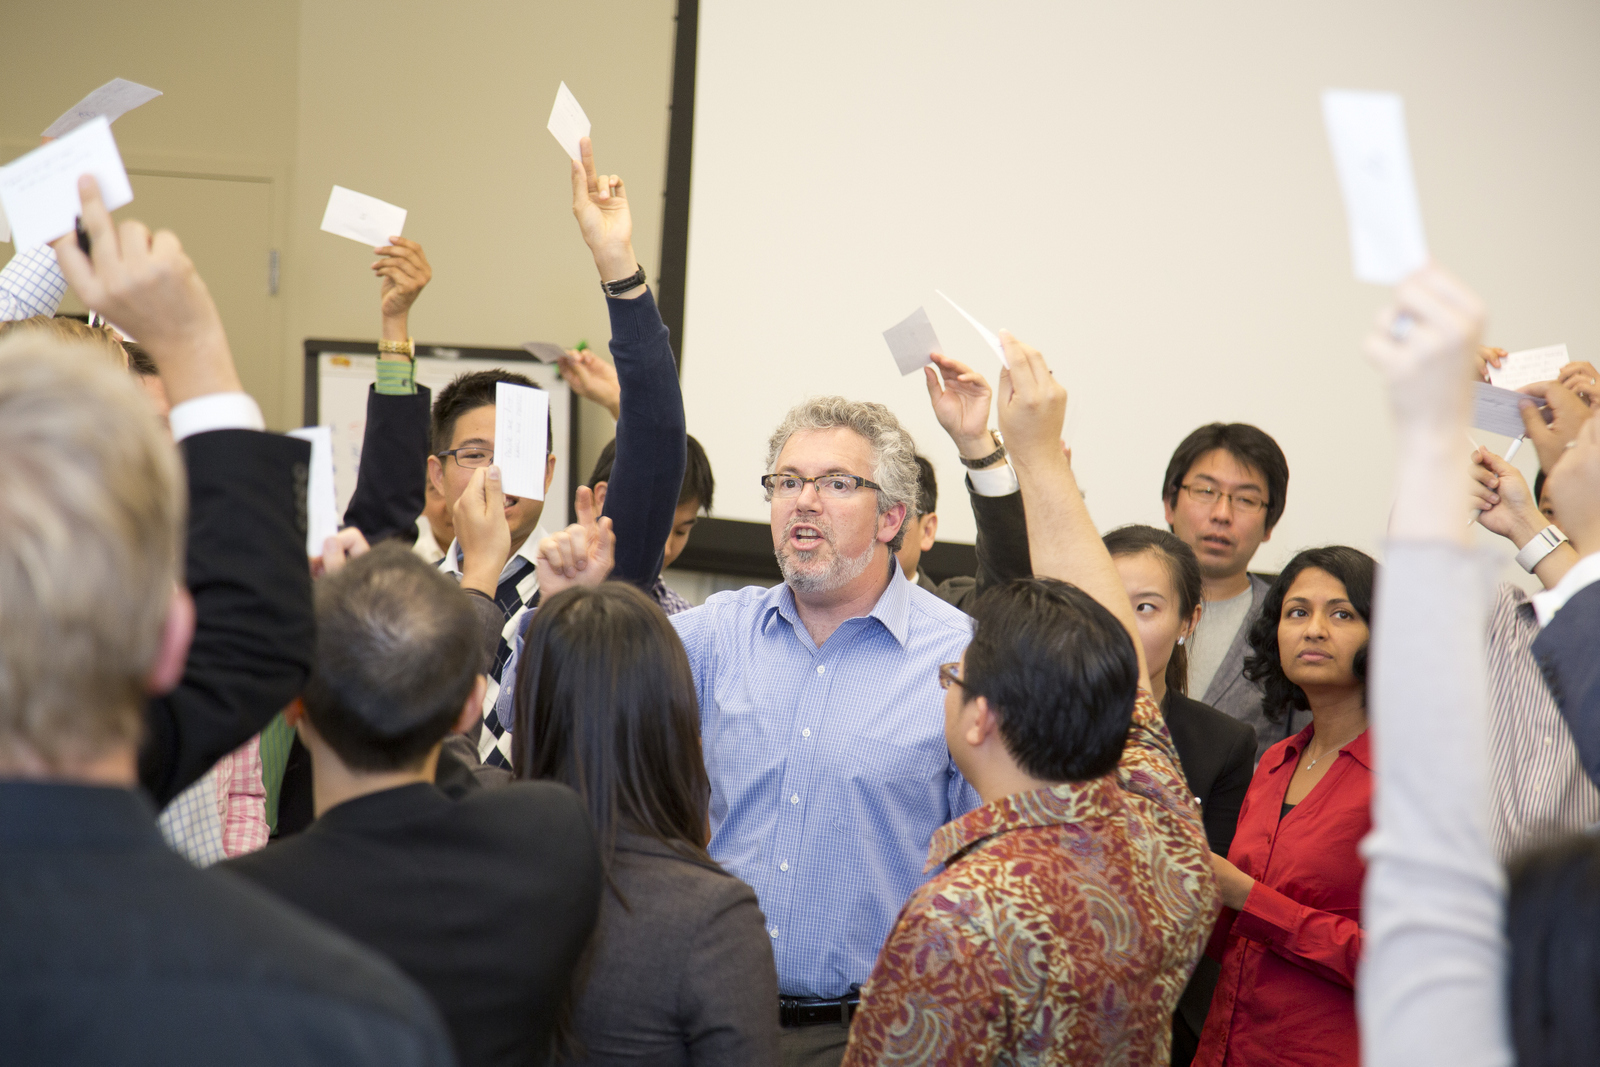 Stanford Business School faculty are eager to teach Sloan Fellows given the experience they bring to the class, the program director says.